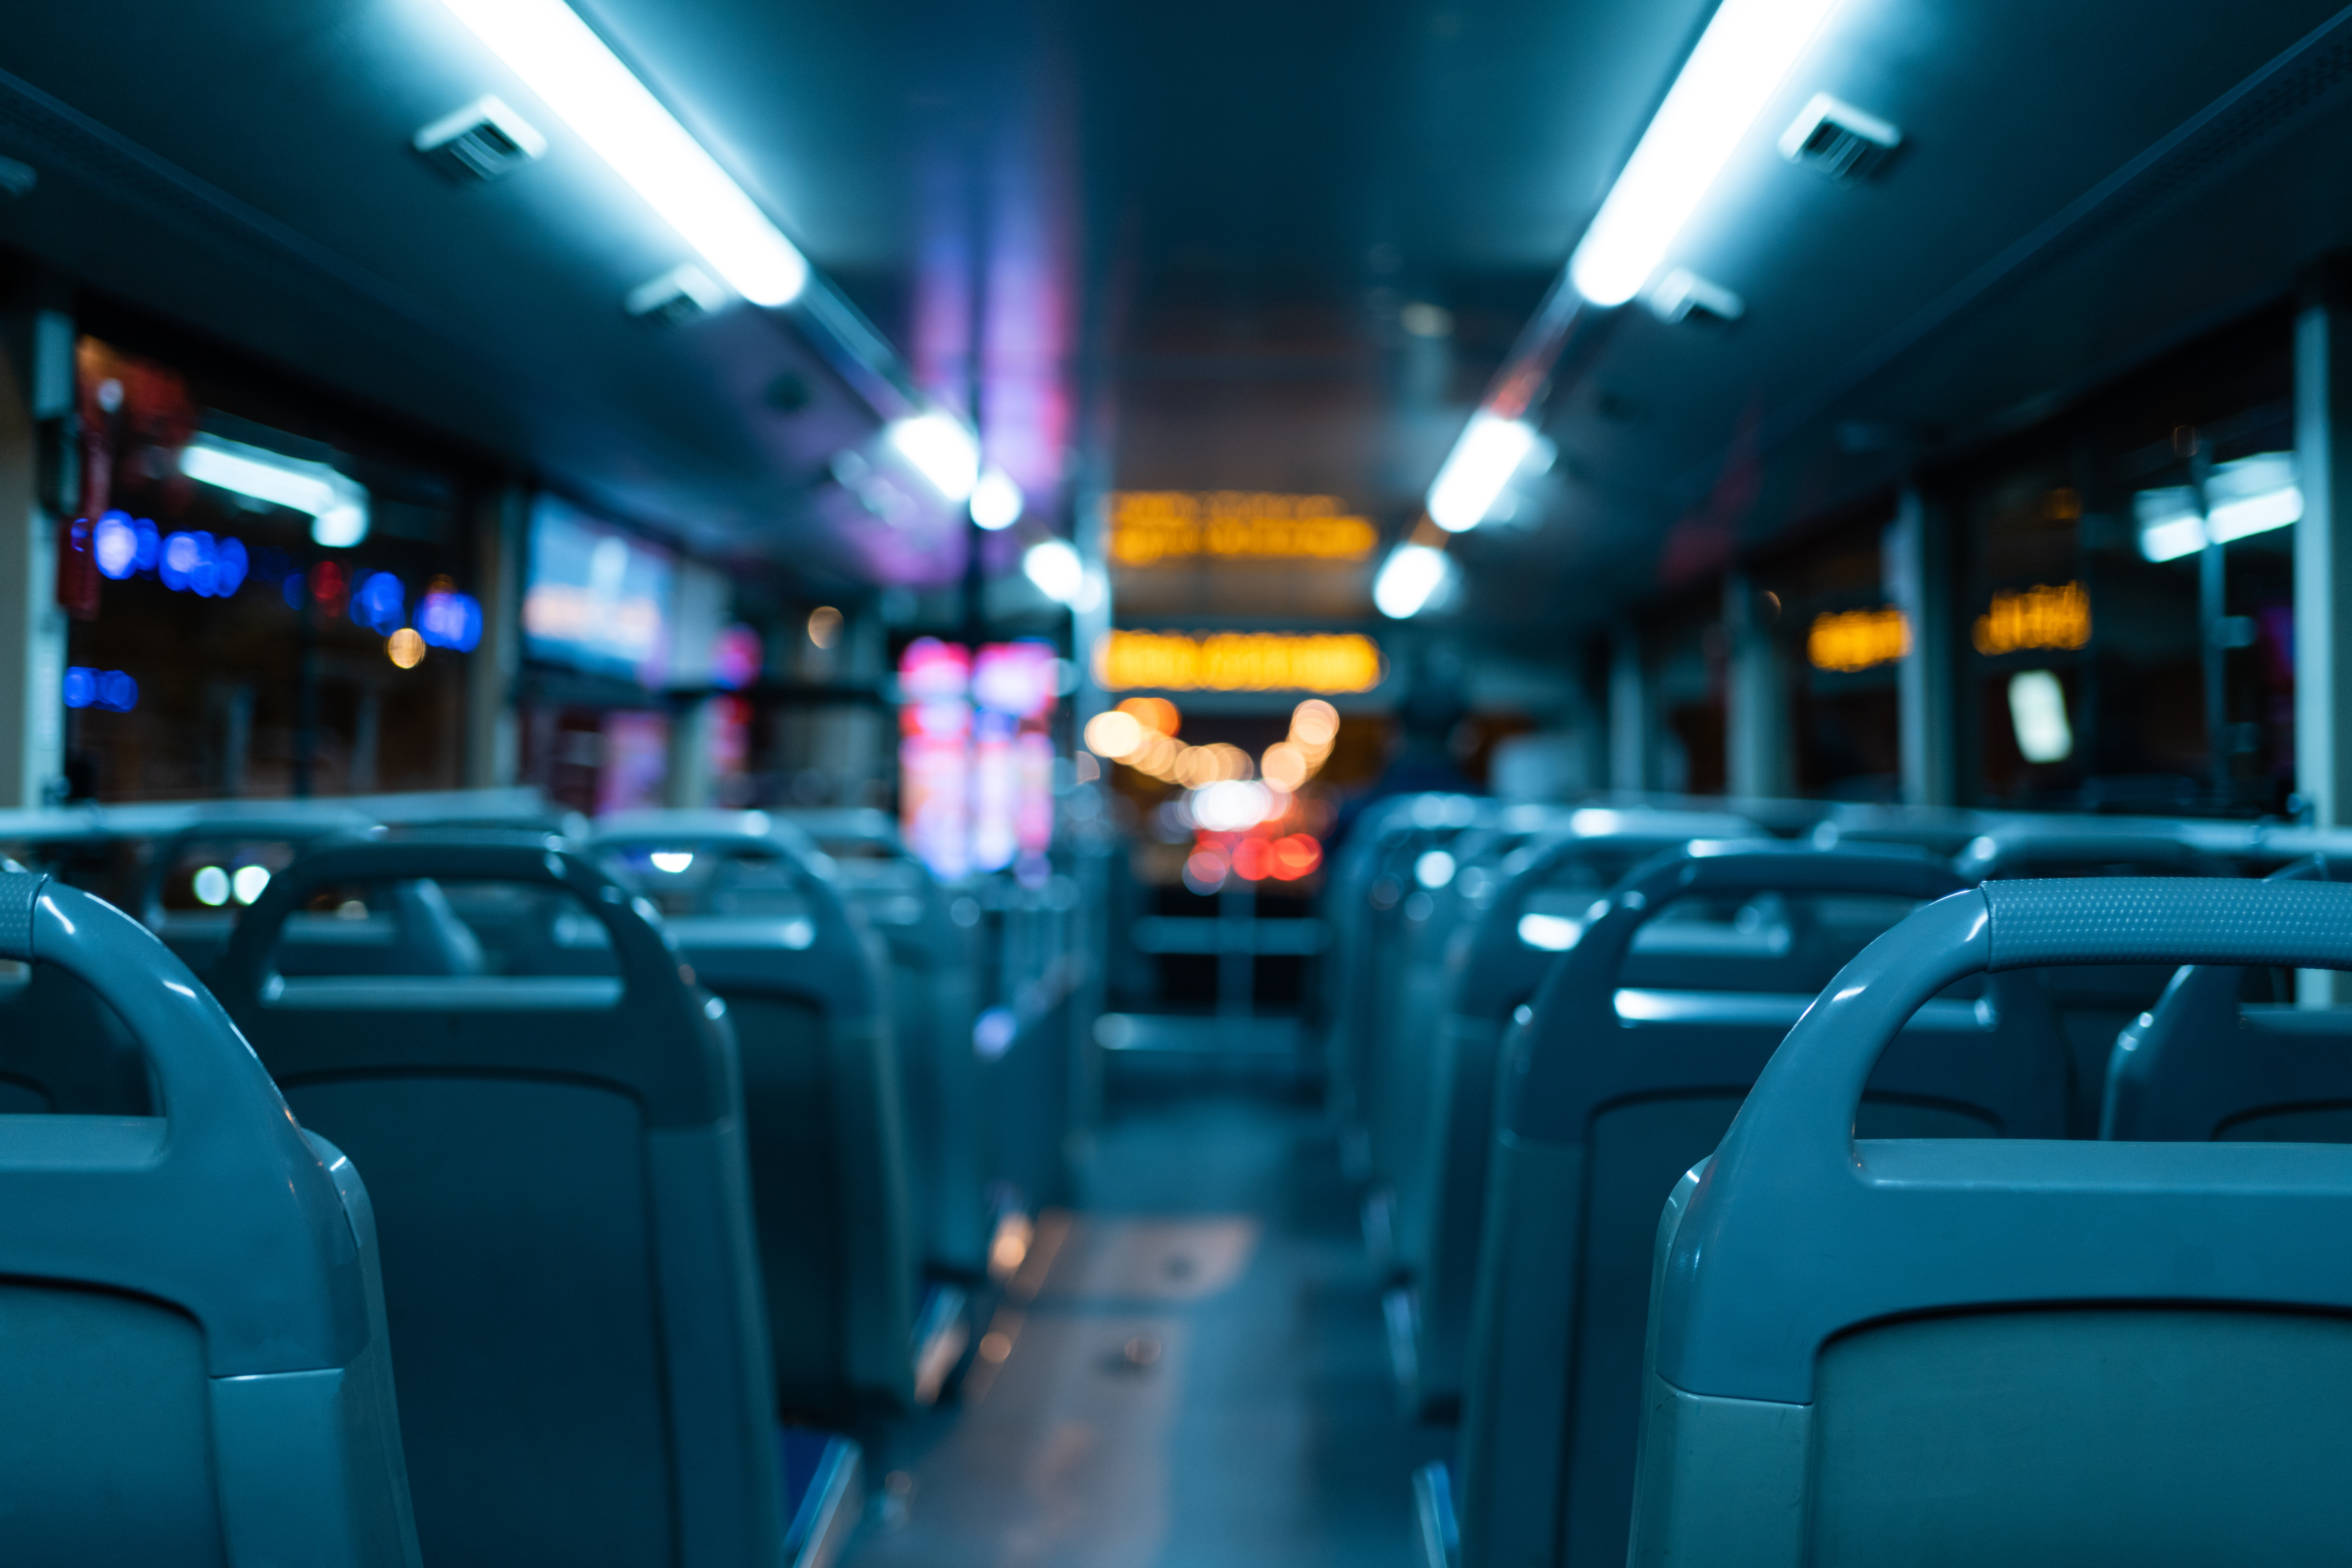 The Most Annoying Things About Public Transportation